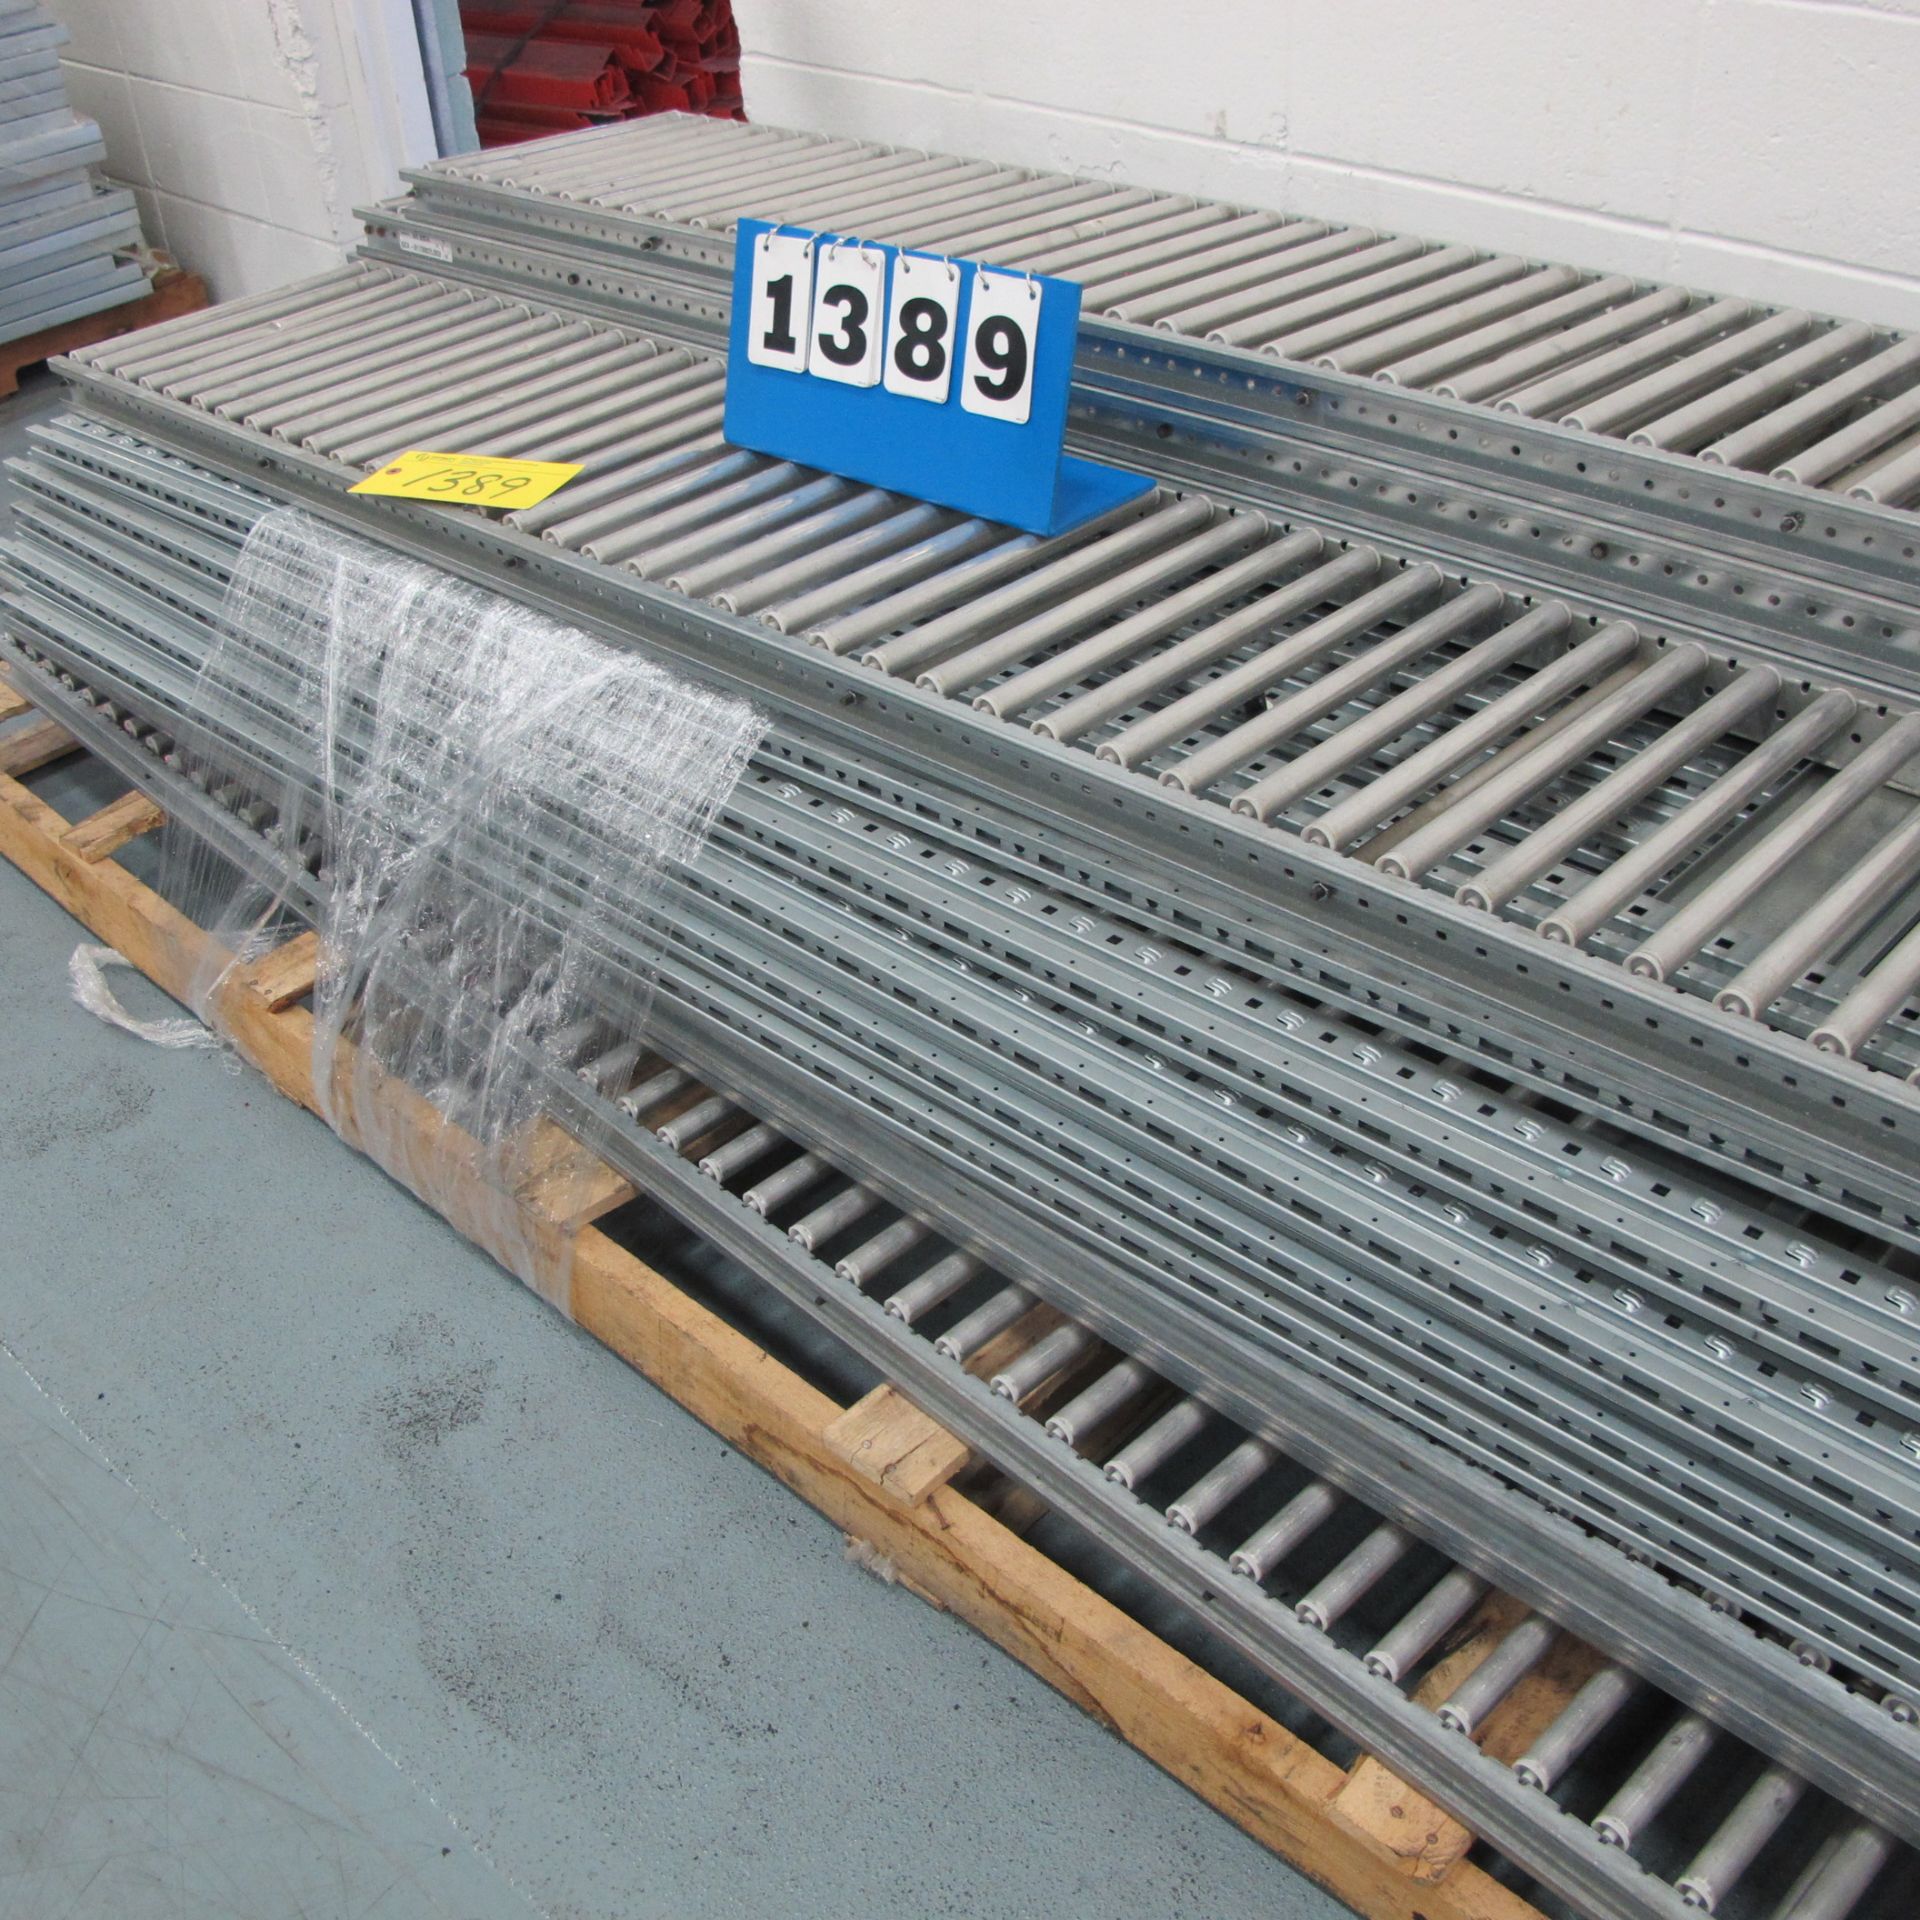 LOT GREY SHELVING AND ROLLER CONVEYOR - Image 2 of 2